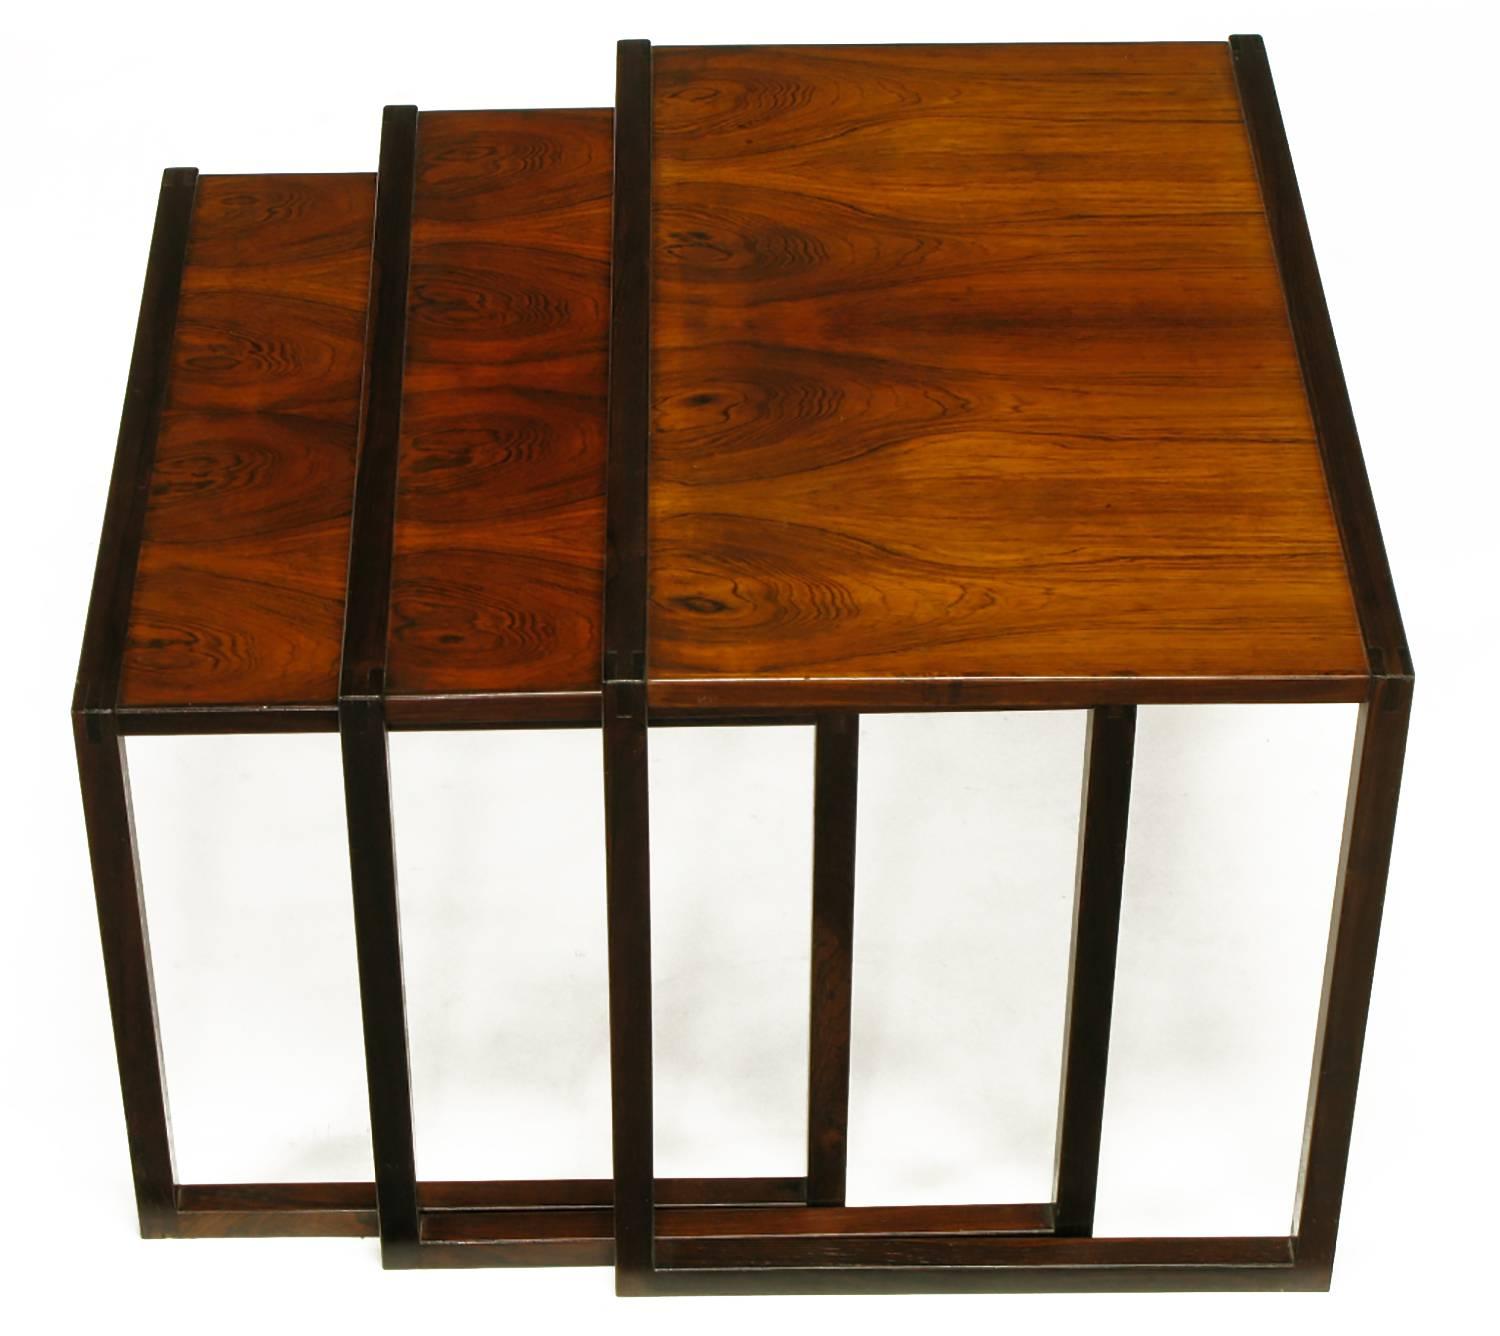 Spare in line, these three tables are topped by matching and highly figured rosewood veneers. Would work well as an end or side table. Rectilinear frames of rosewood crafted to nestle smaller-into-larger. Designed by Kai Kristiansen and manufactured